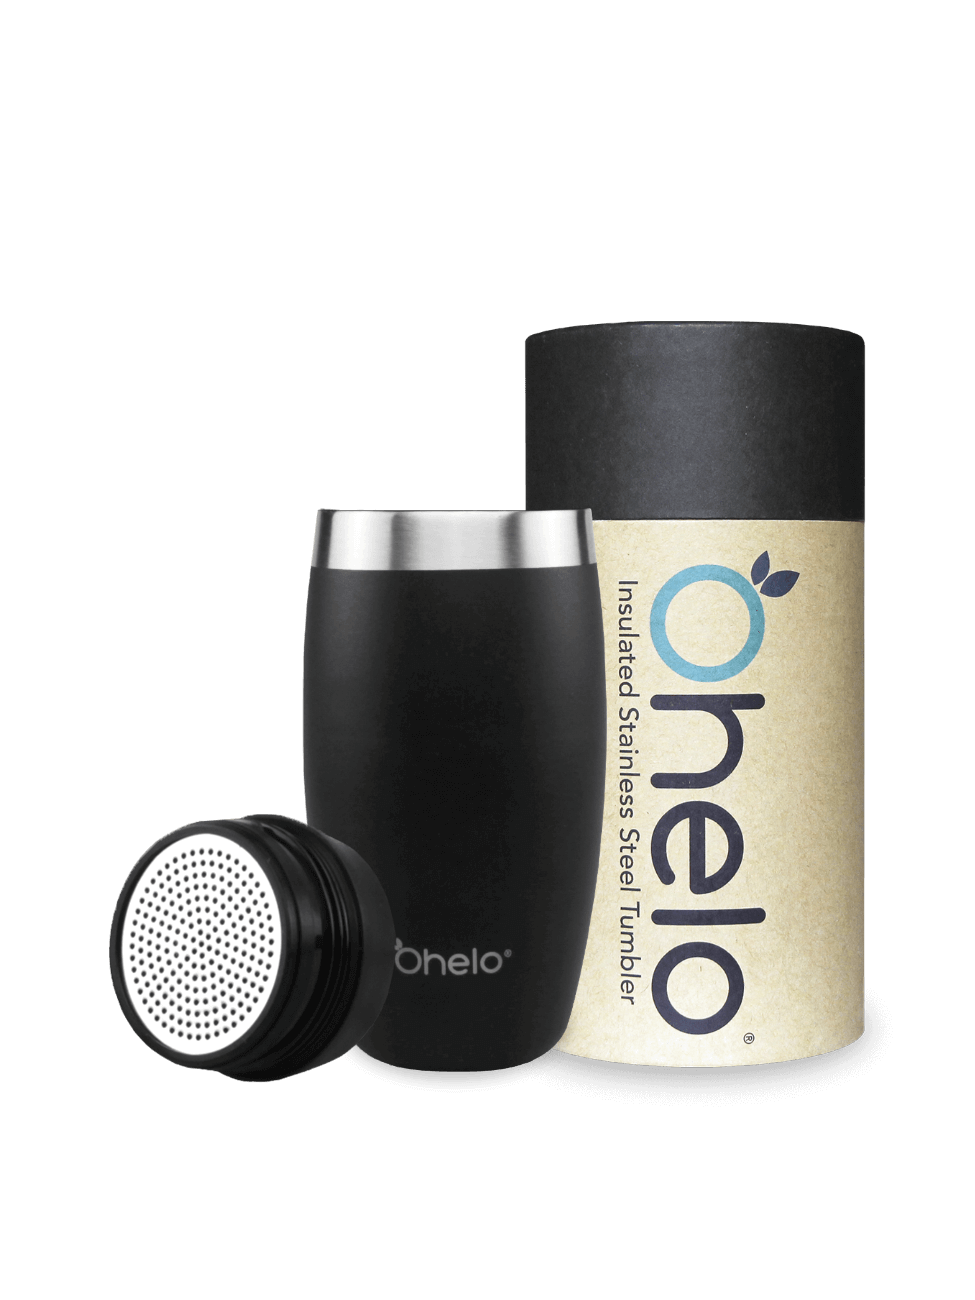 Ohelo insulated travel mug in black with removable tea strainer and recycled packaging